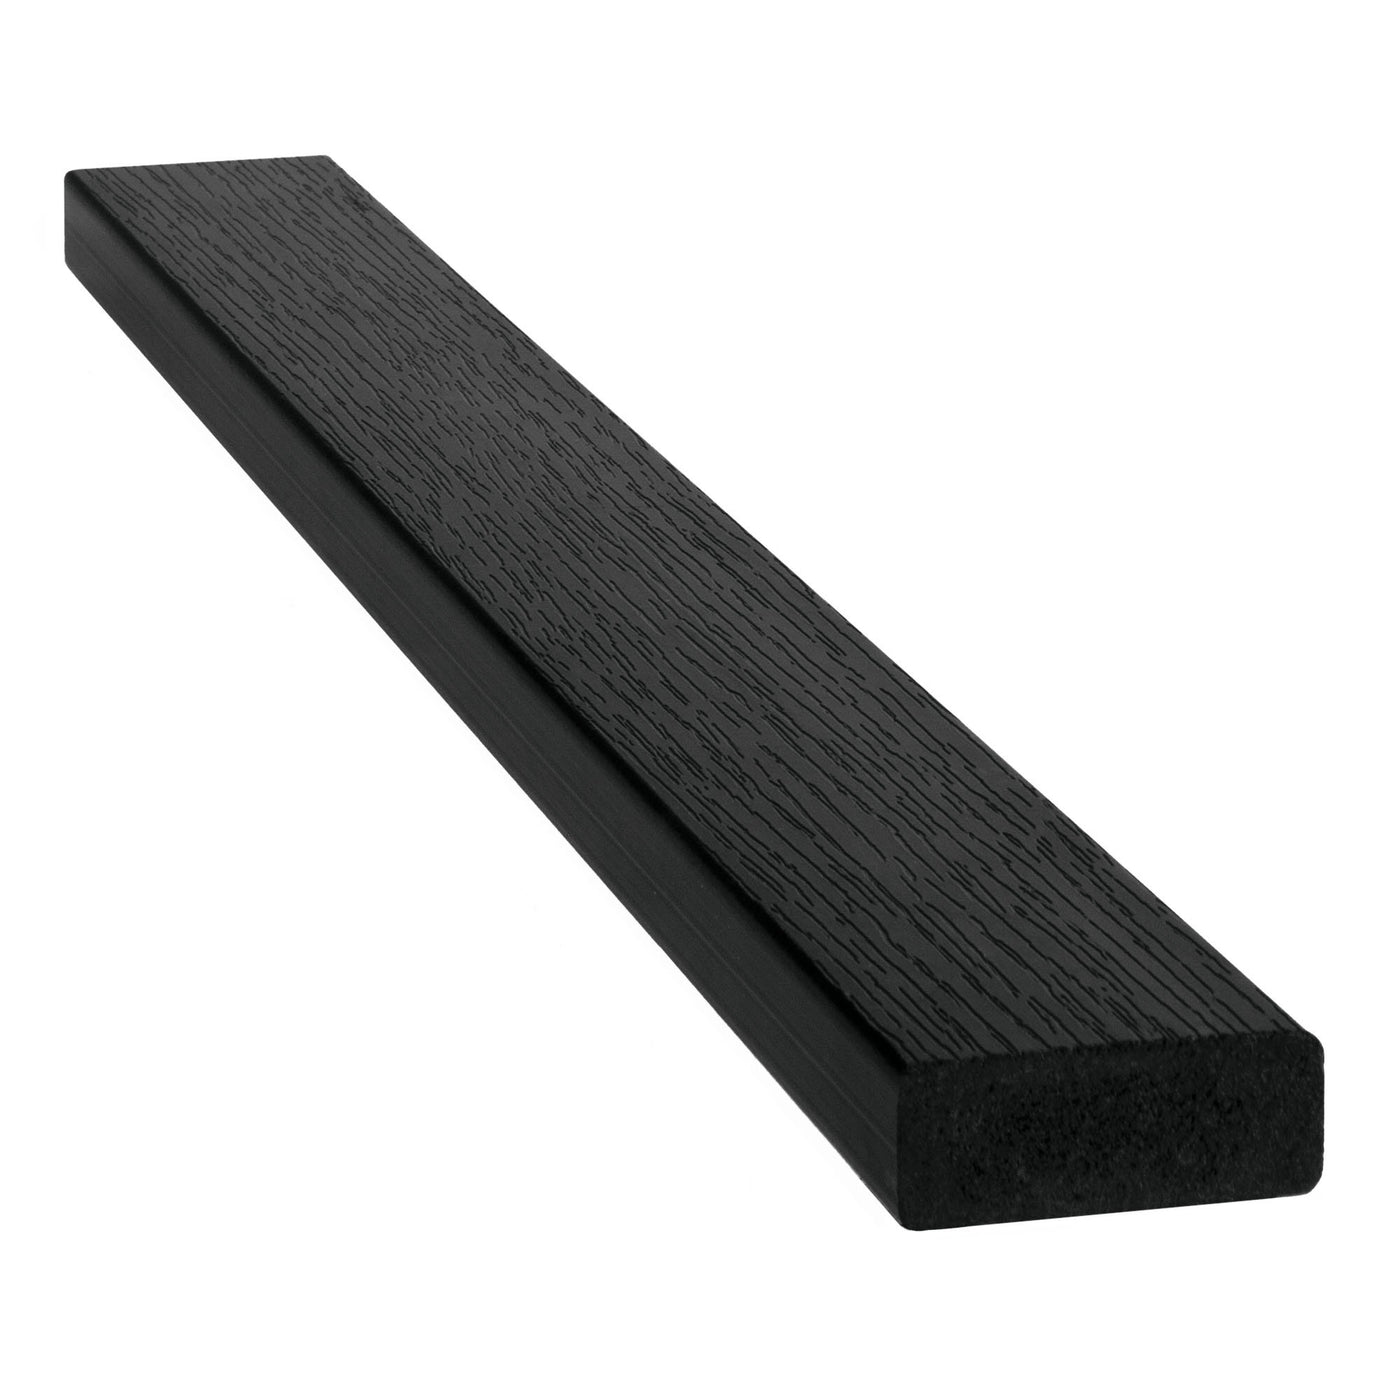 Everwood synthetic wood dimensional lumber {5/4” x 3” x 6ft} Nominal (recycled resin) - 8 Pieces Highwood USA Black 